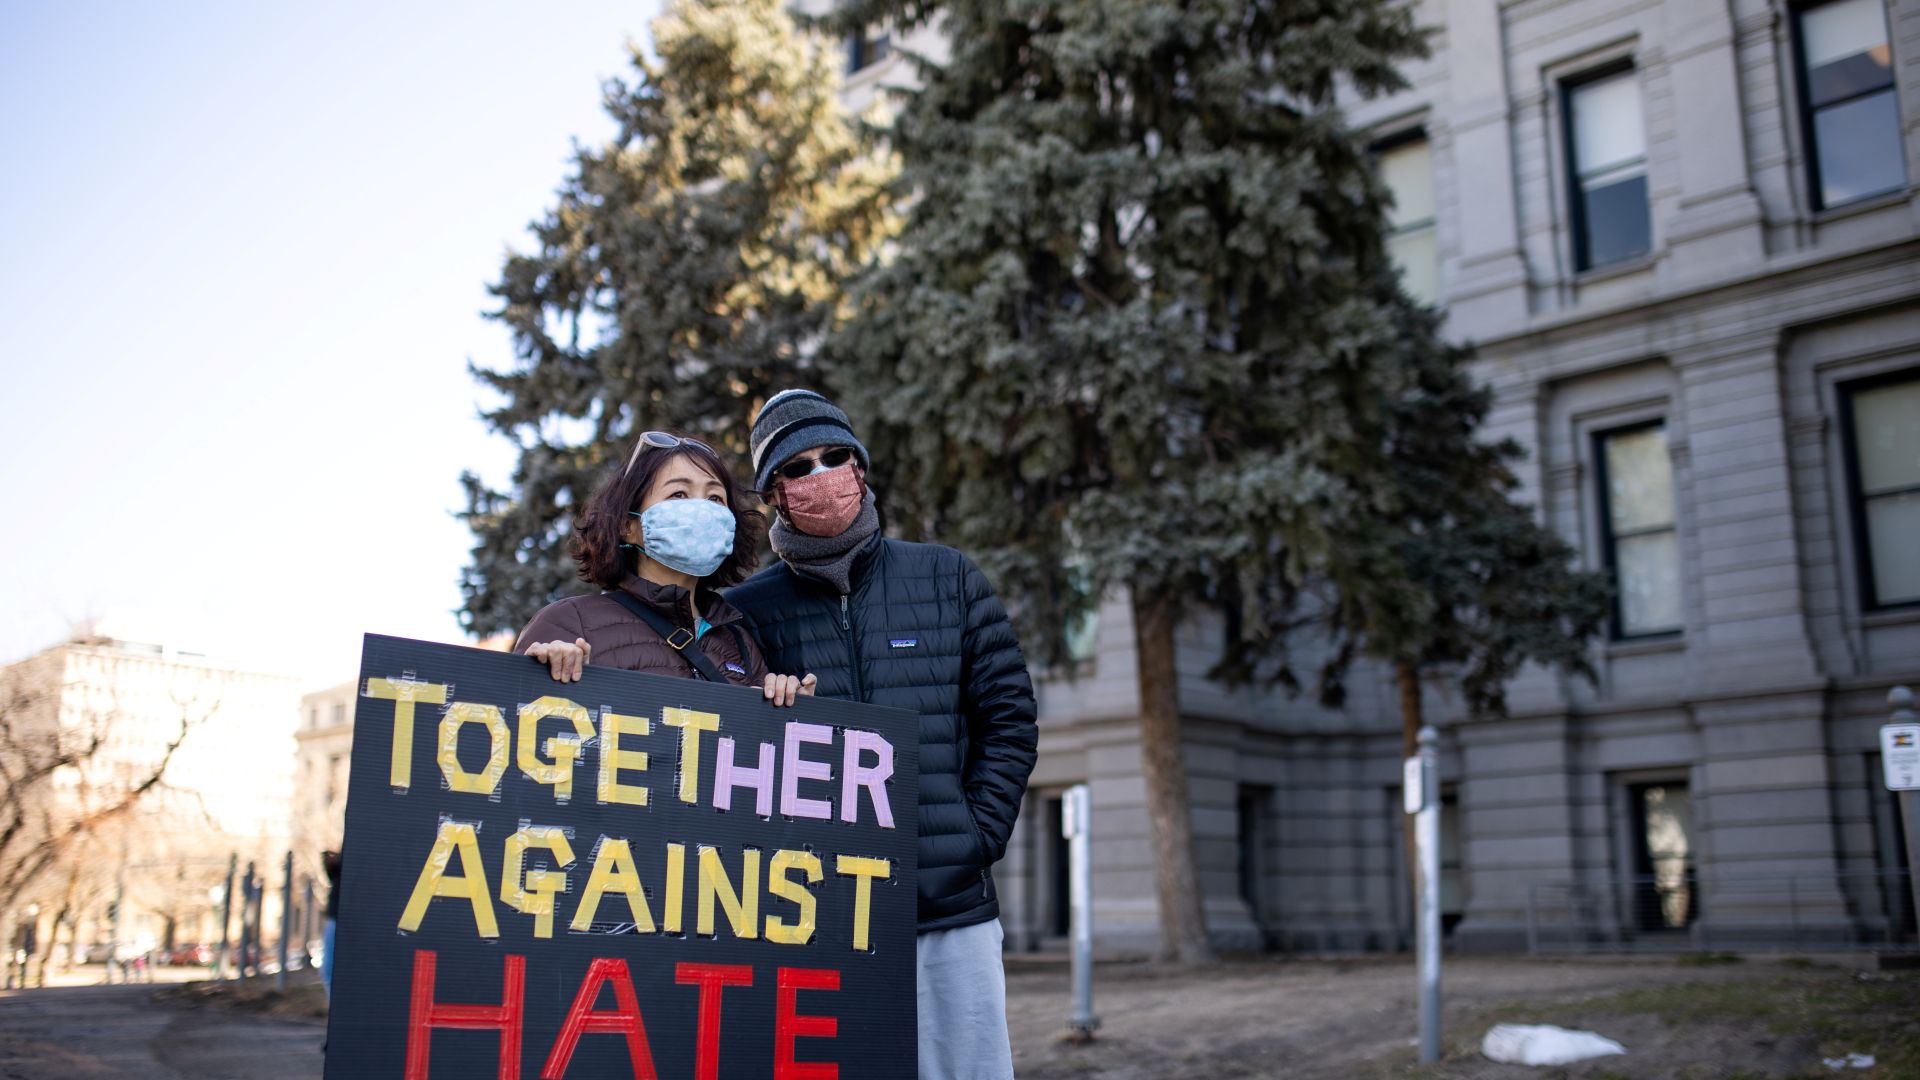 A woman holds a sign that reads 'Together Against Hate' during a wave of anti-Asian hate during the COVID-19 pandemic